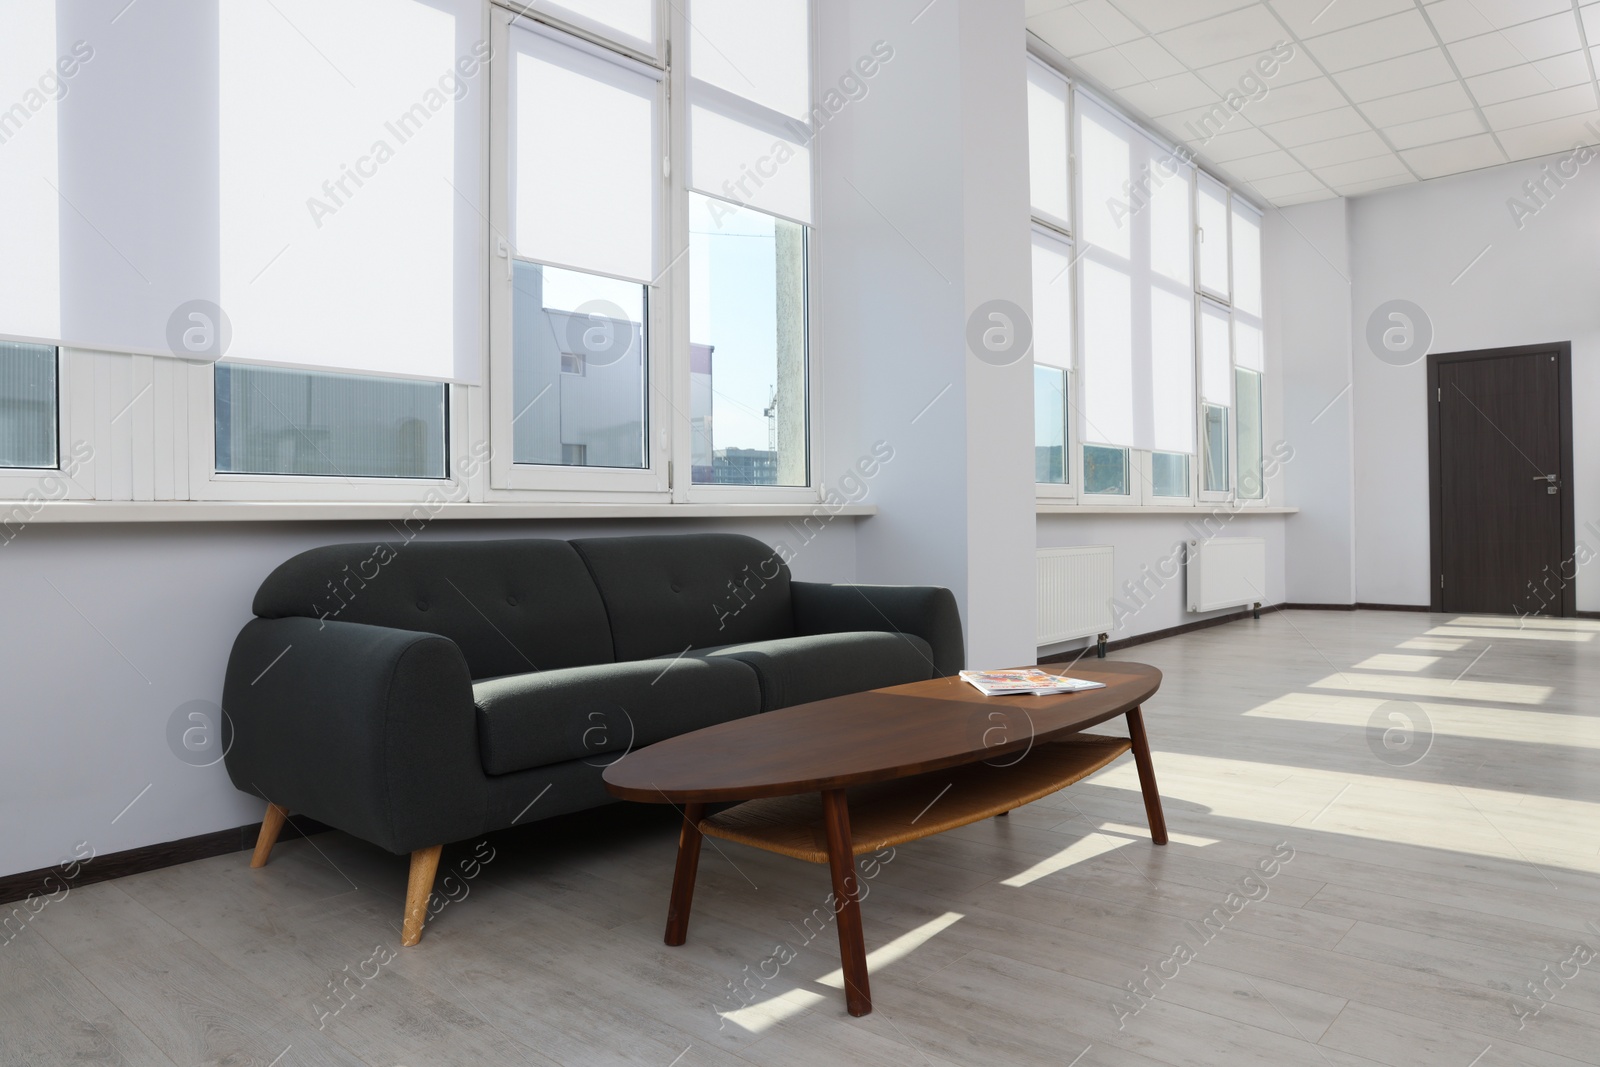 Photo of Comfortable sofa and table near large windows with white roller blinds indoors